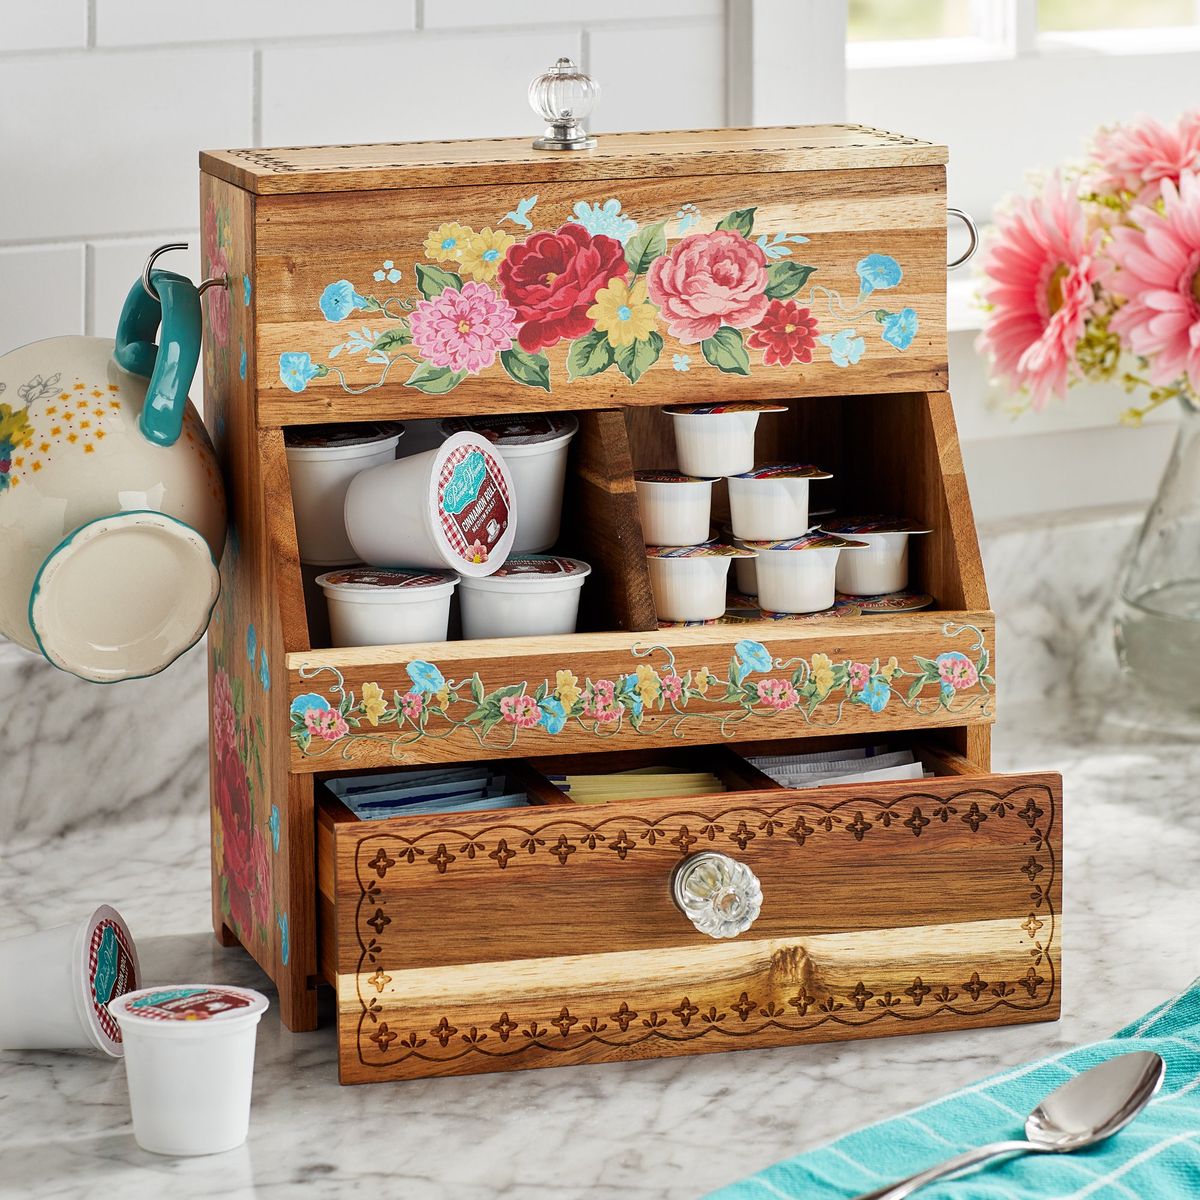 https://hips.hearstapps.com/hmg-prod/images/the-pioneer-woman-coffee-organizer-1636492545.jpeg?crop=1.00xw:1.00xh;0,0&resize=1200:*